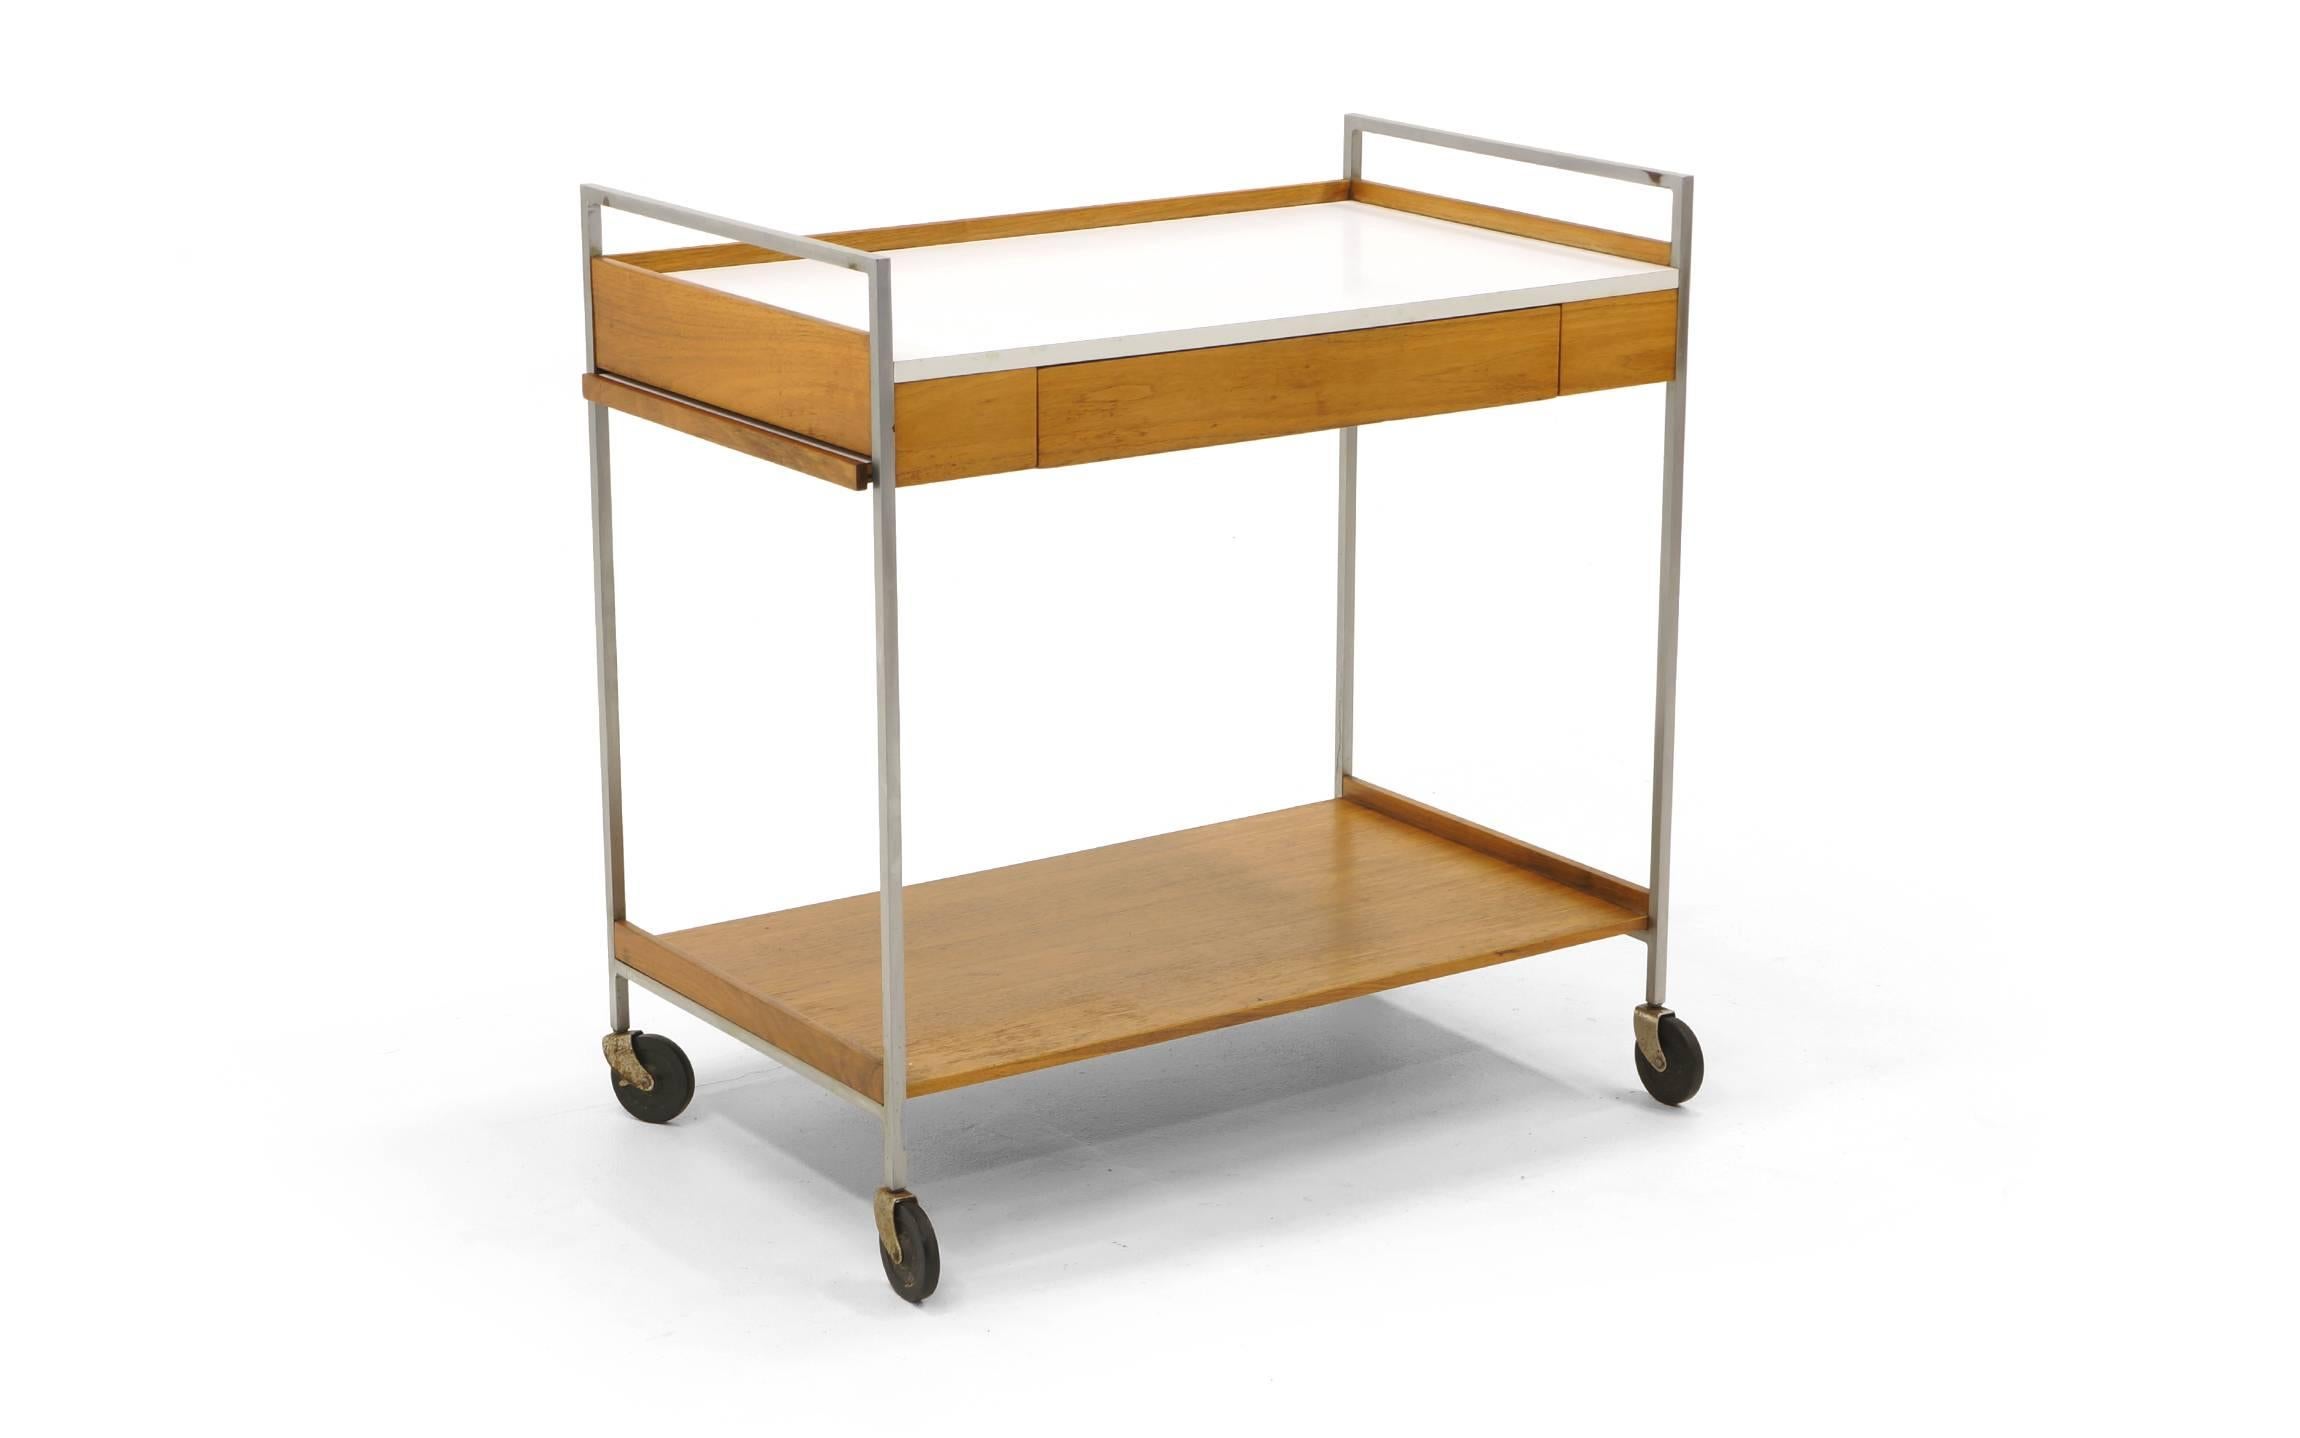 Rare George Nelson for Herman Miller serving cart on casters. Completely original. White laminate, walnut and brushed steel frame.